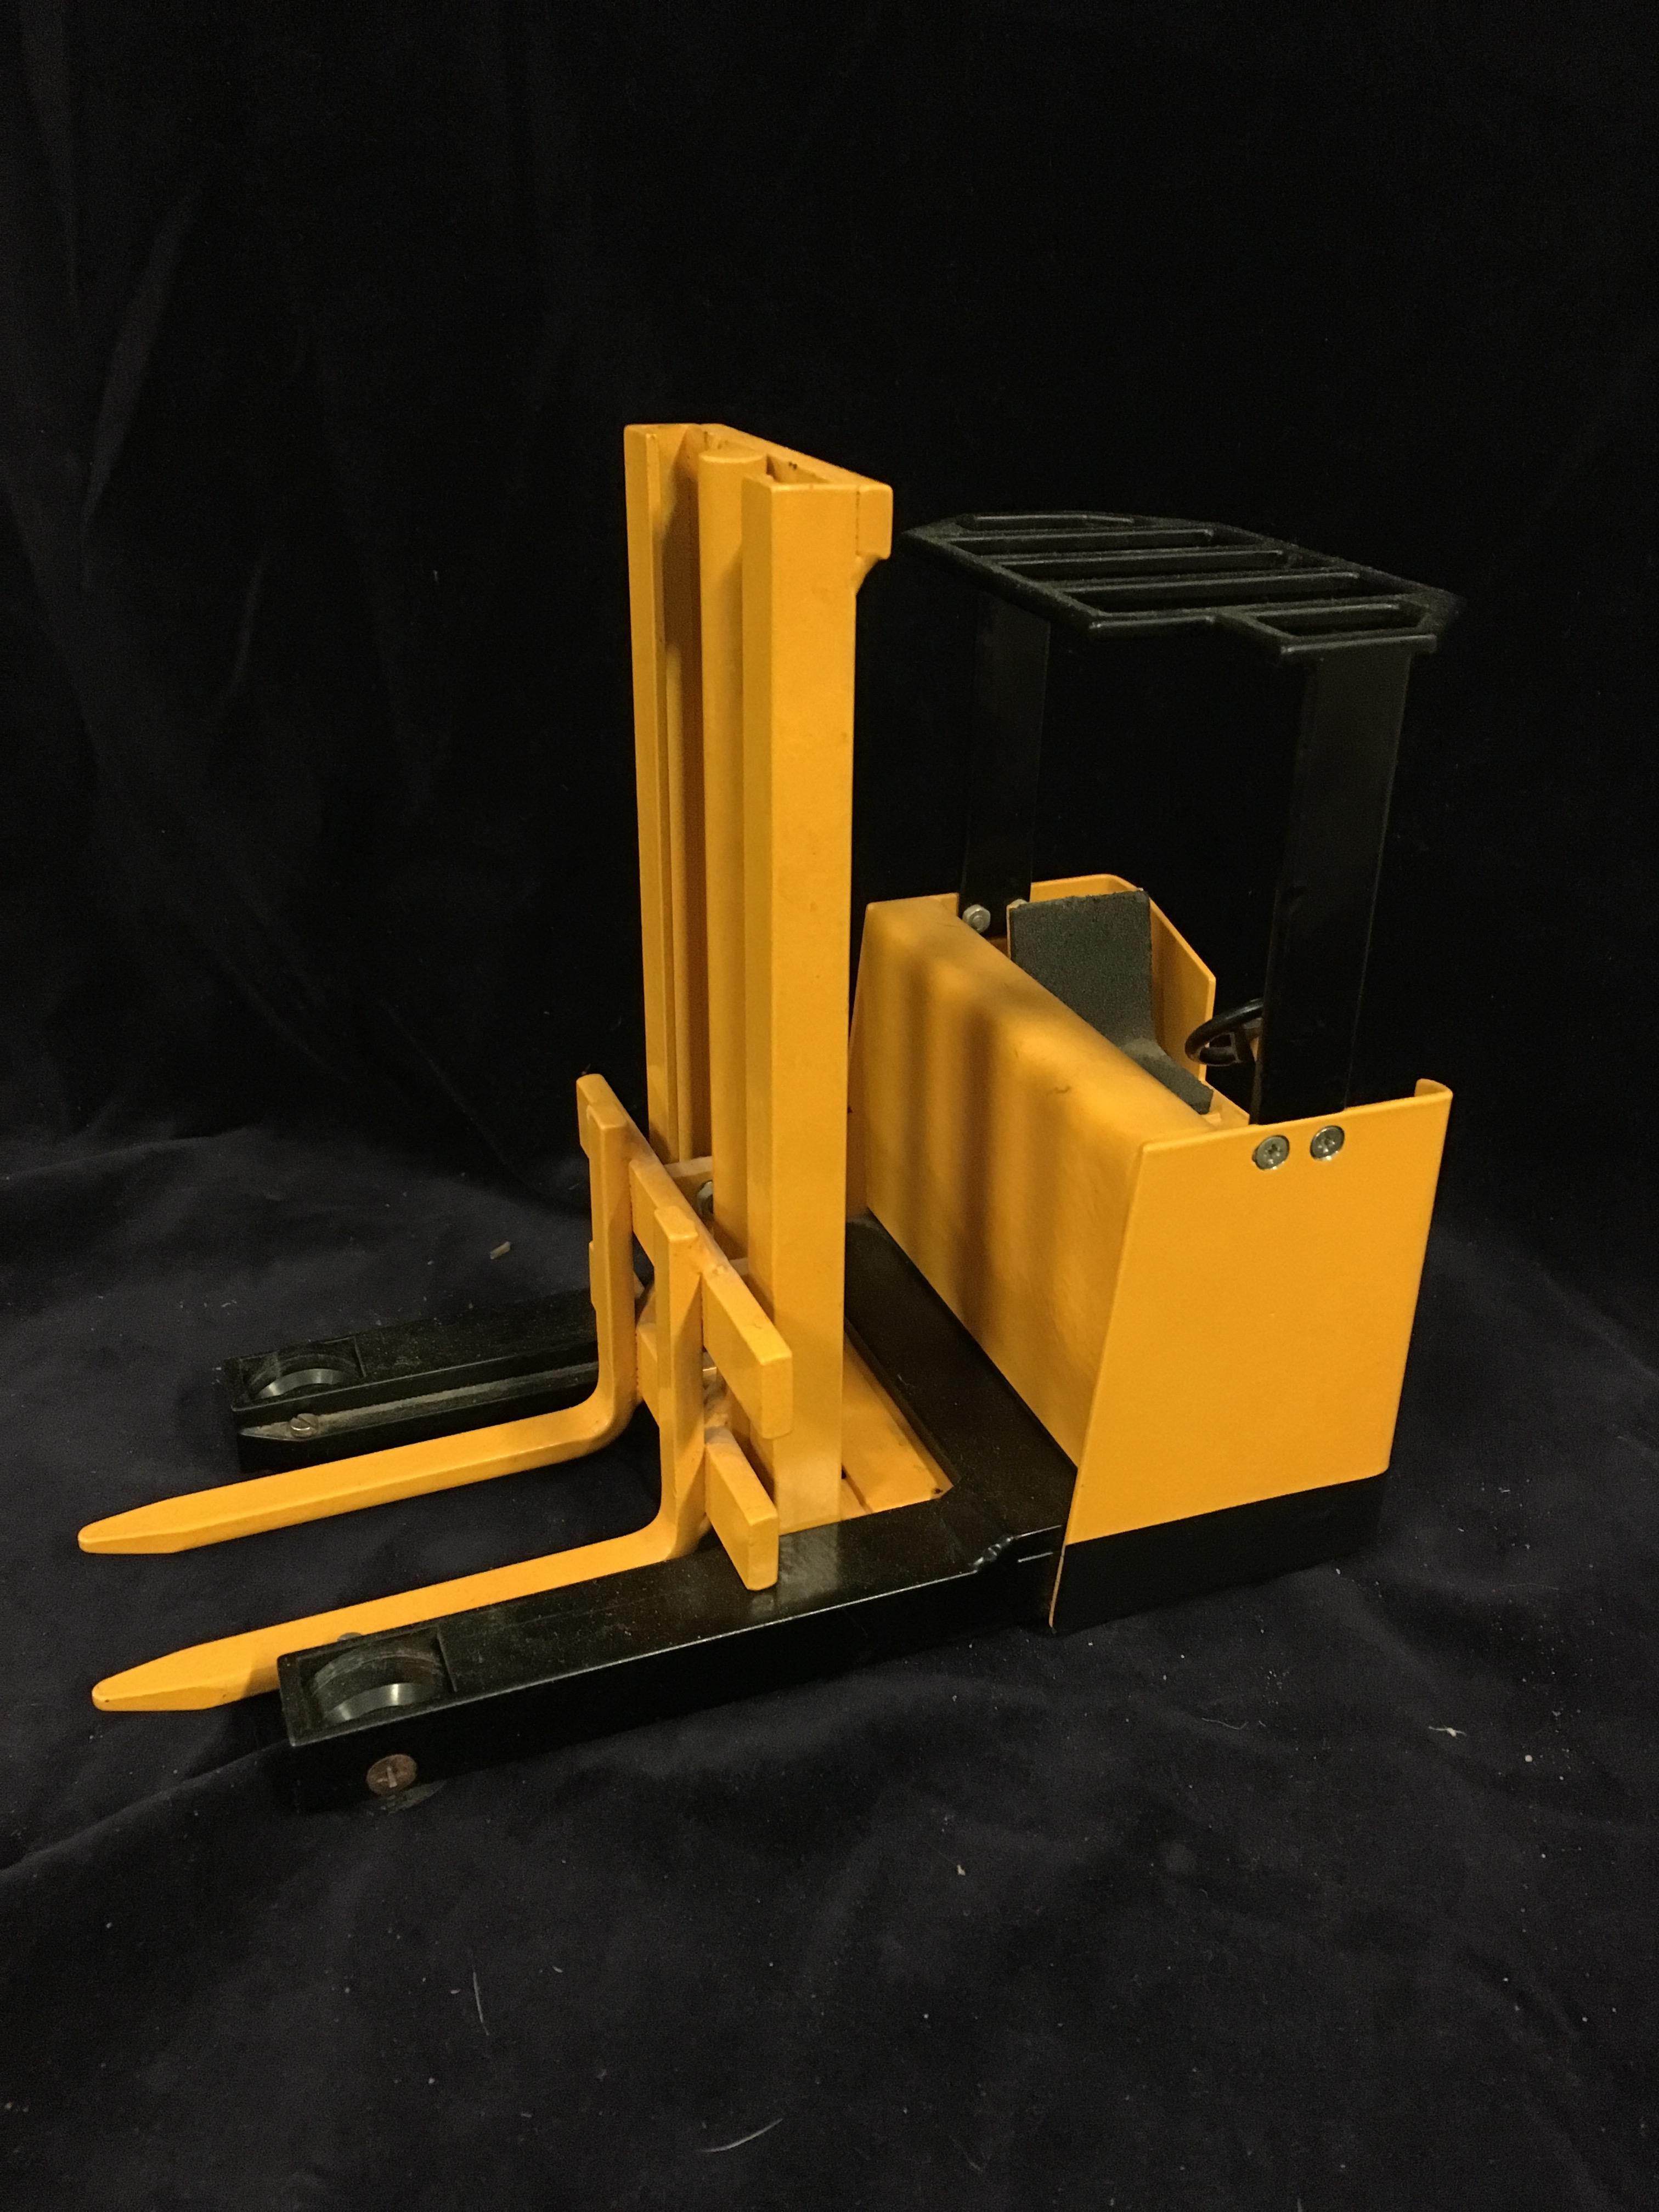 A scale forklift truck made by Caterpillar as a one off for design purposes